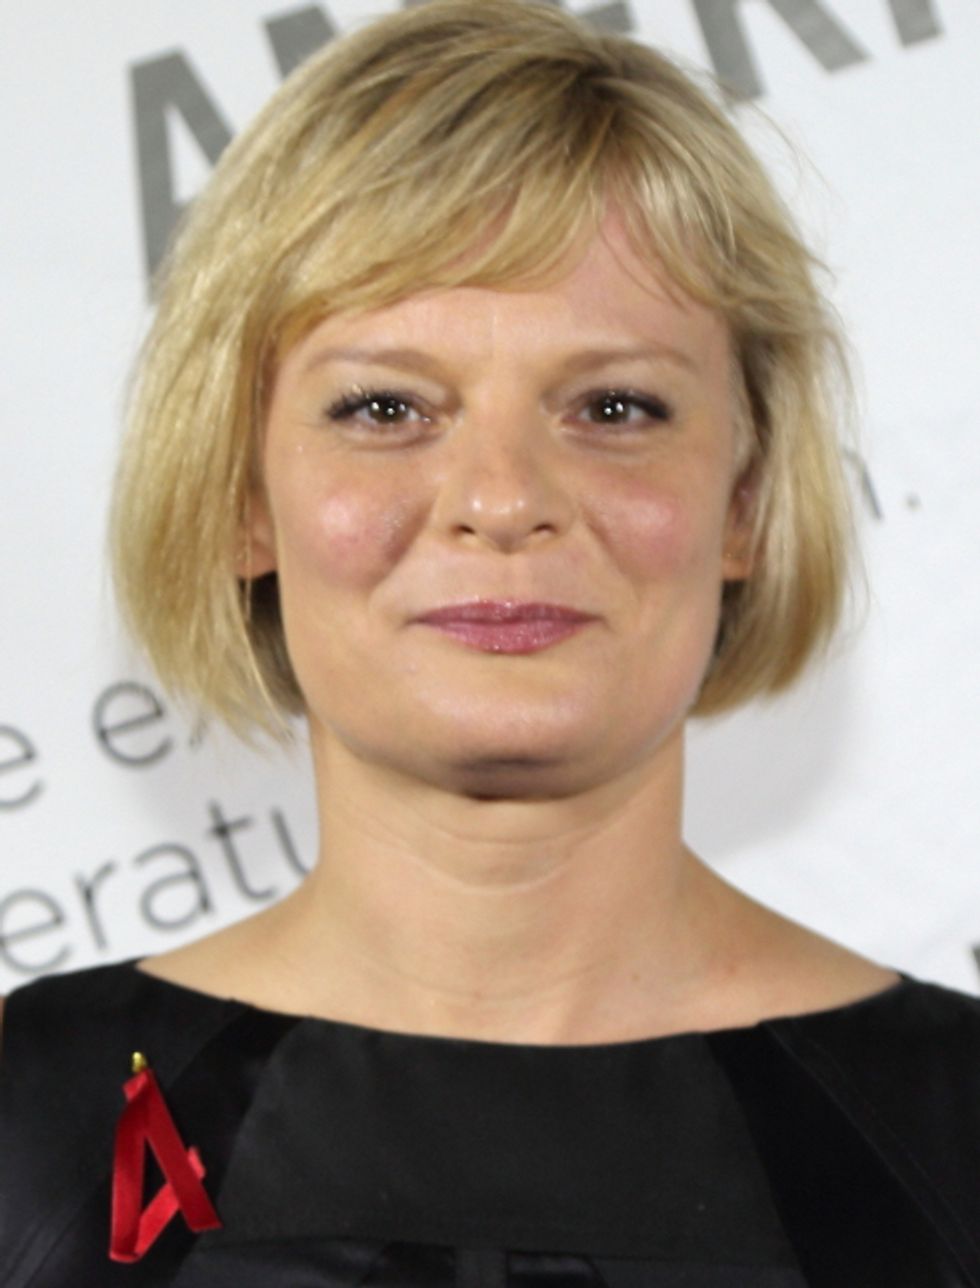 Newsbuster 'Breaks' Story Of Martha Plimpton's Shameful Abortions, About Which She's NOT EVEN ASHAMED!